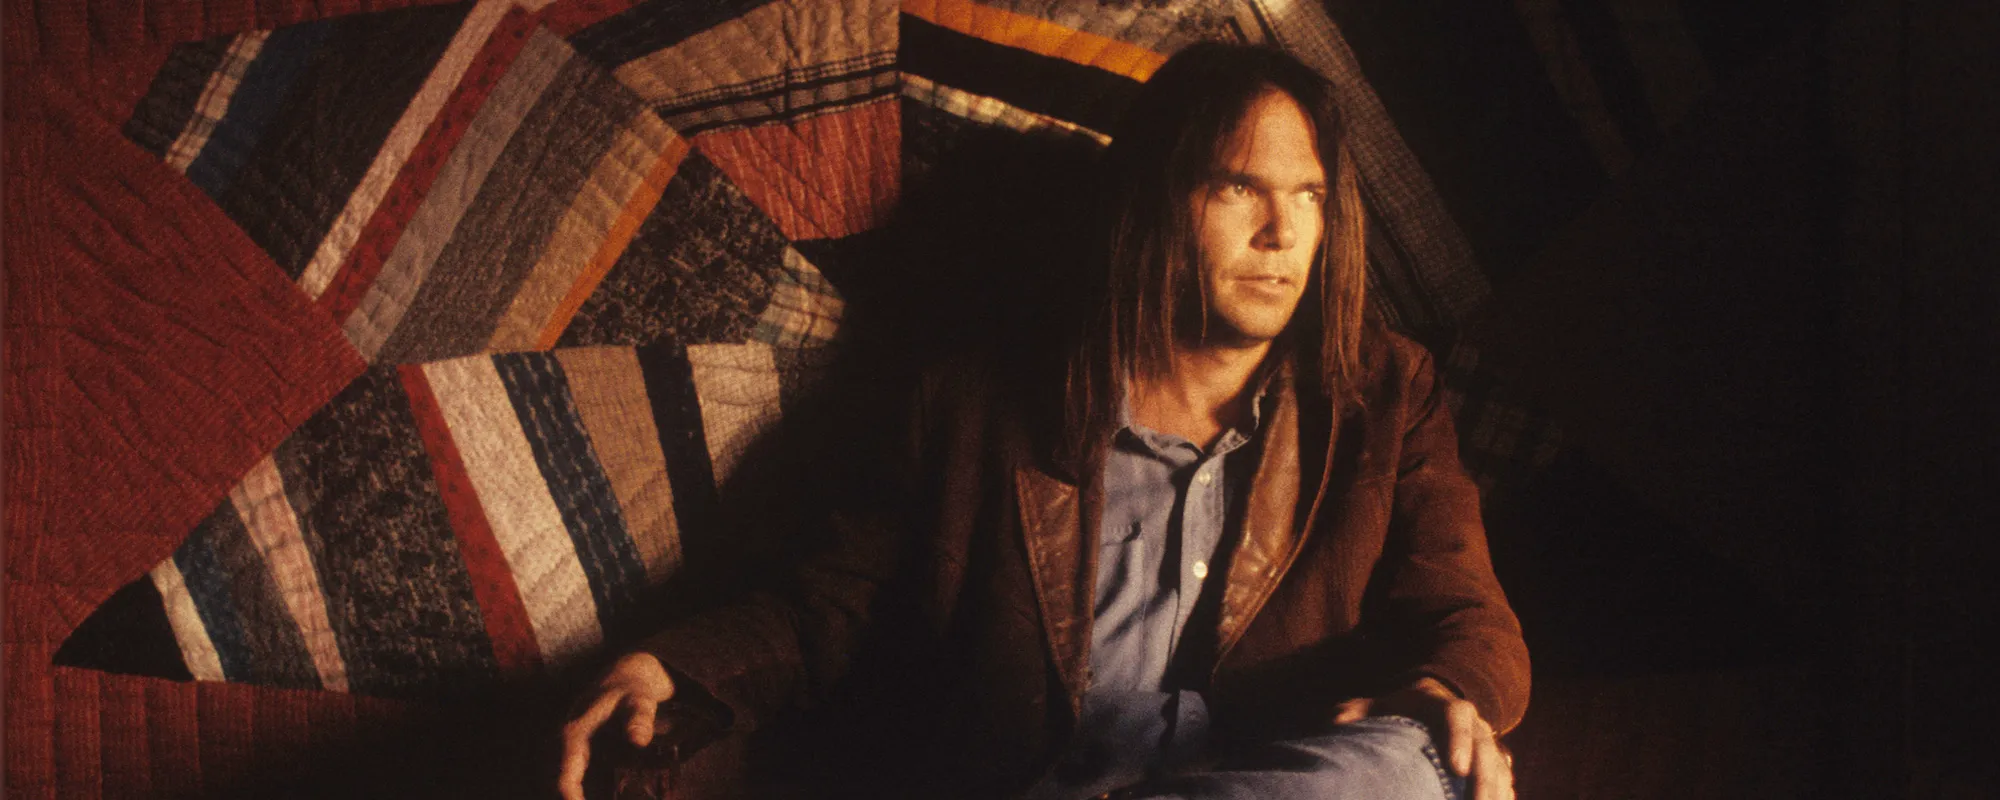 Neil Young to Spotify Staff and Workers: “Get Out”